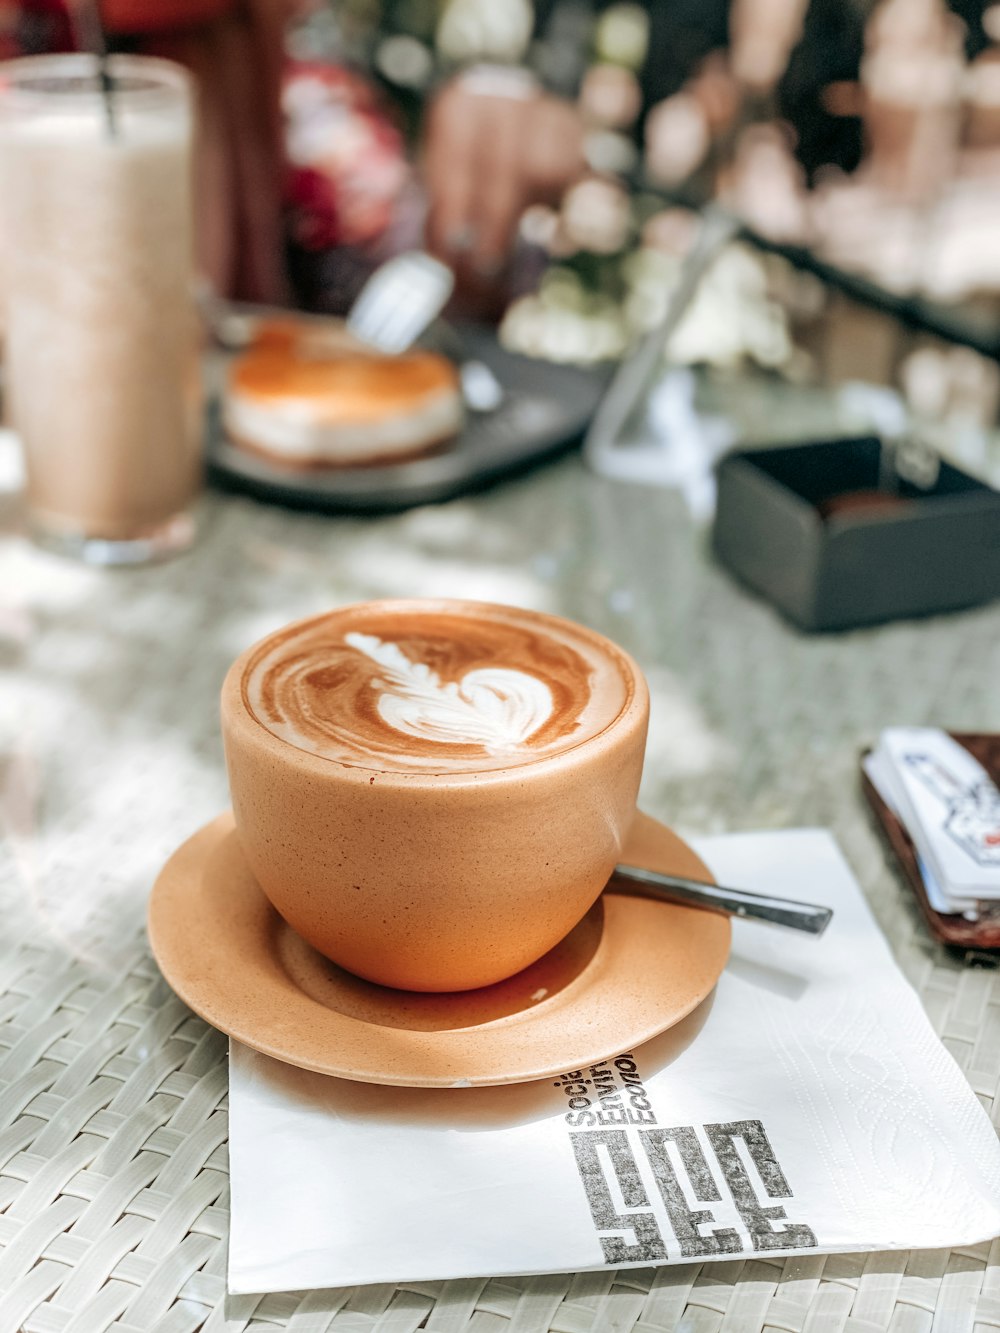 Cappuccino in brown ceramic cup on saucer photo – Free Coffee Image on  Unsplash